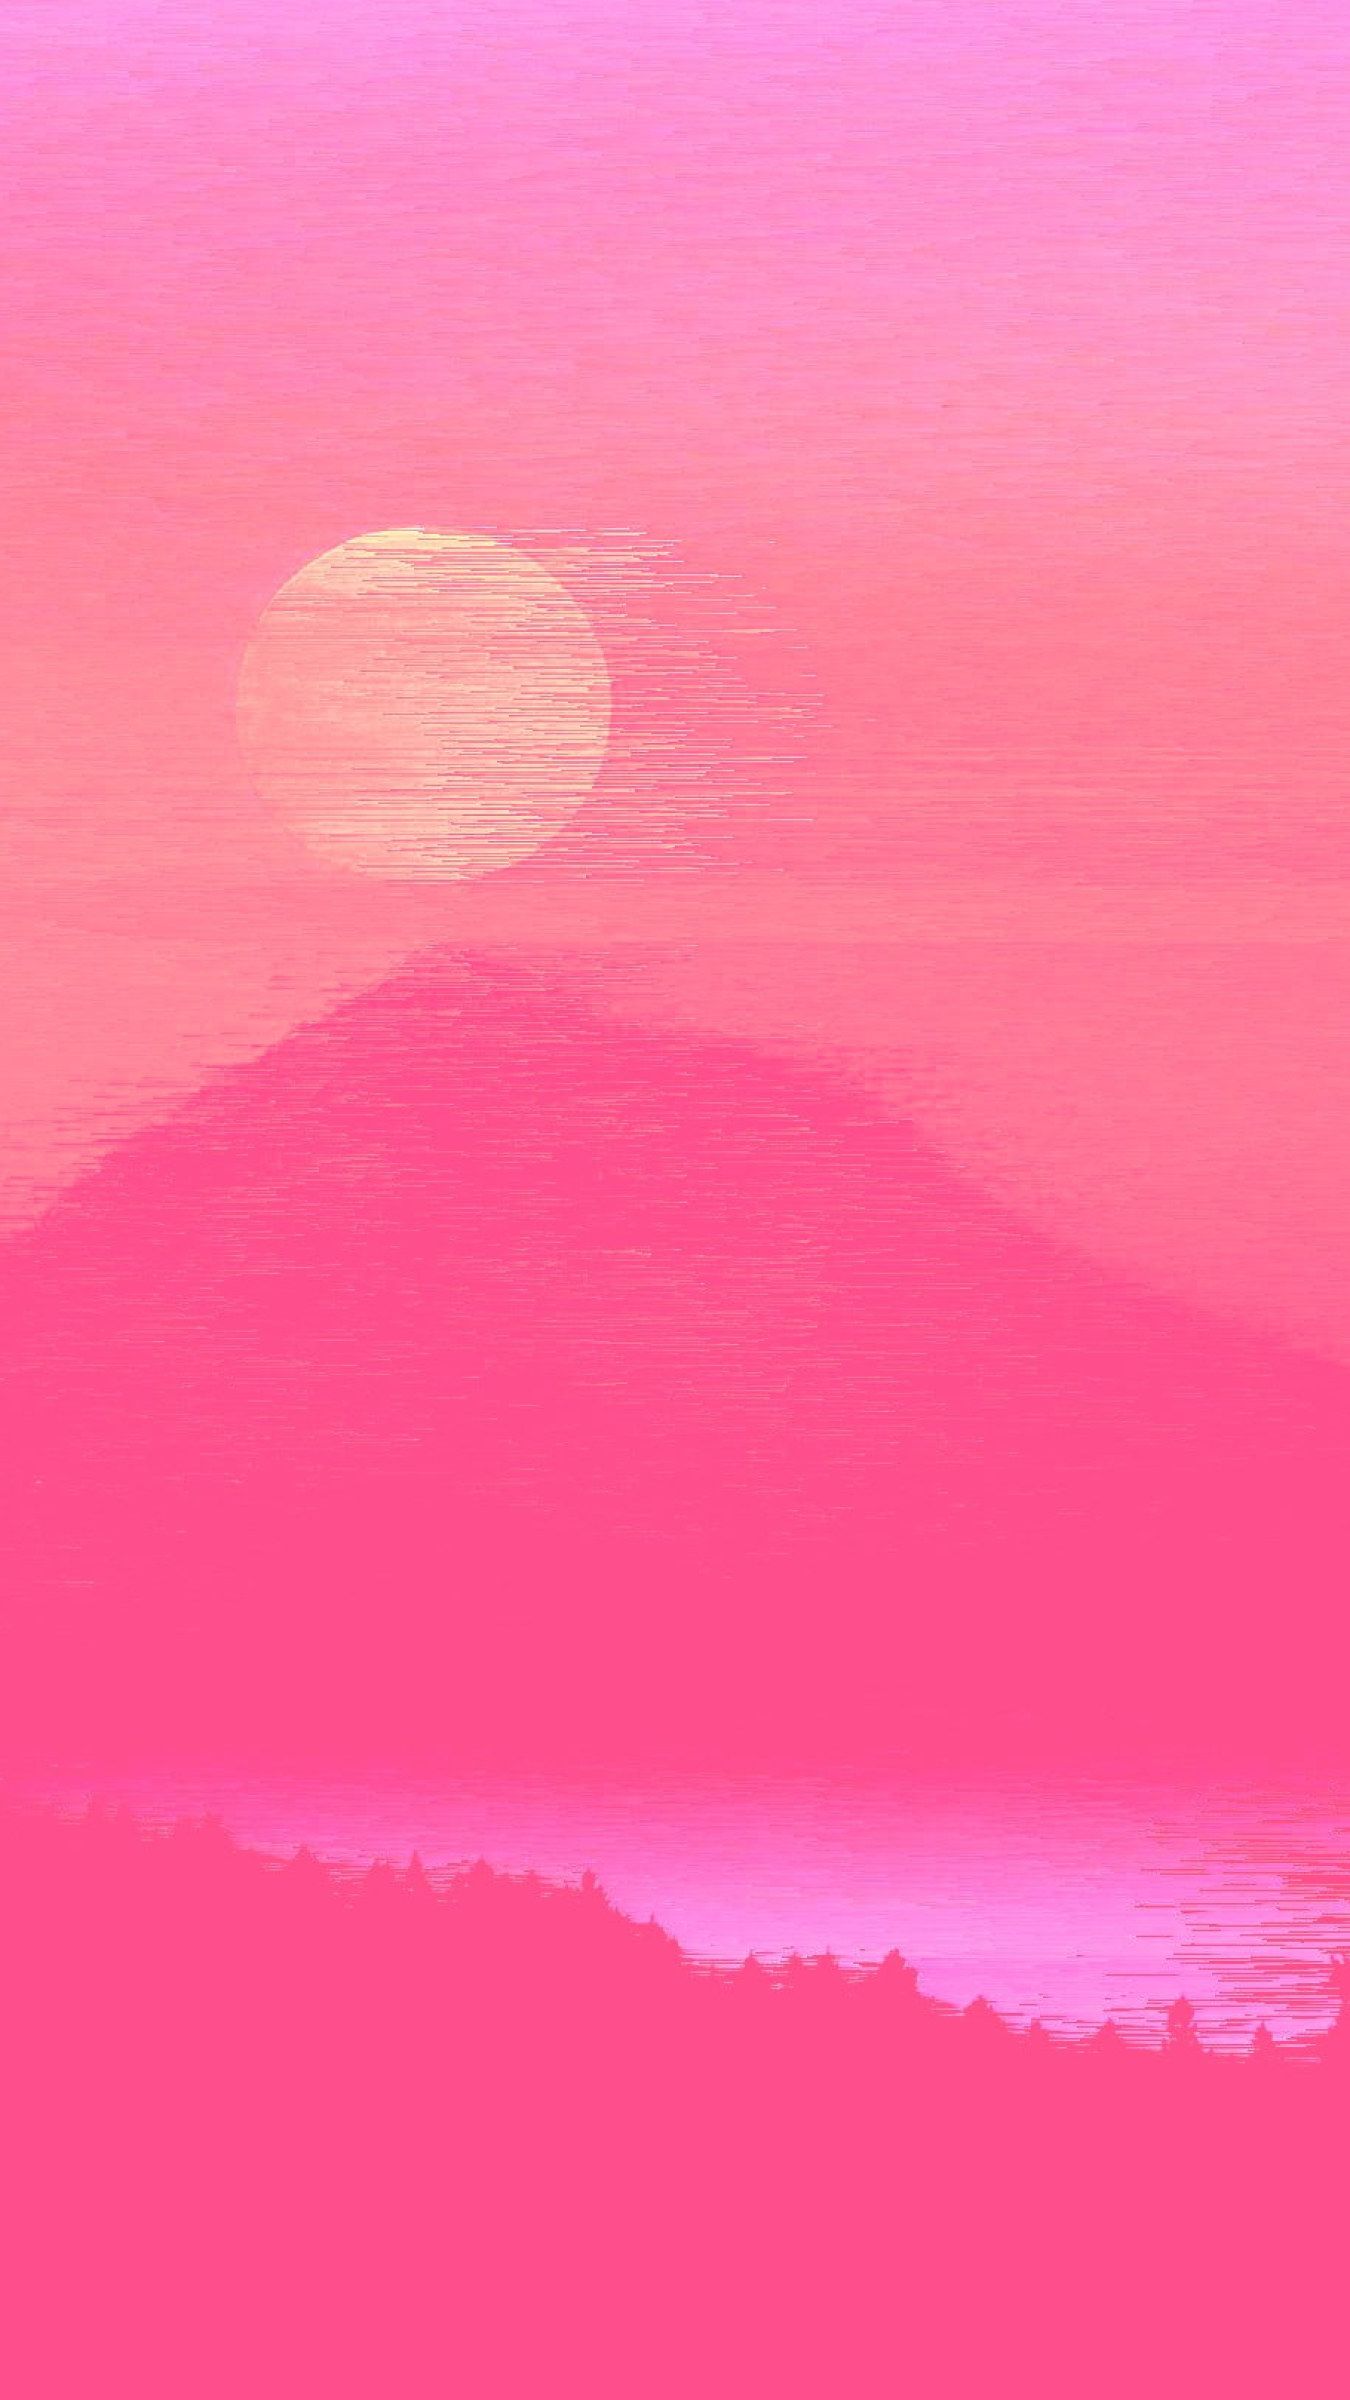 Neon aesthetic pink color colored .wallpaperforu.com